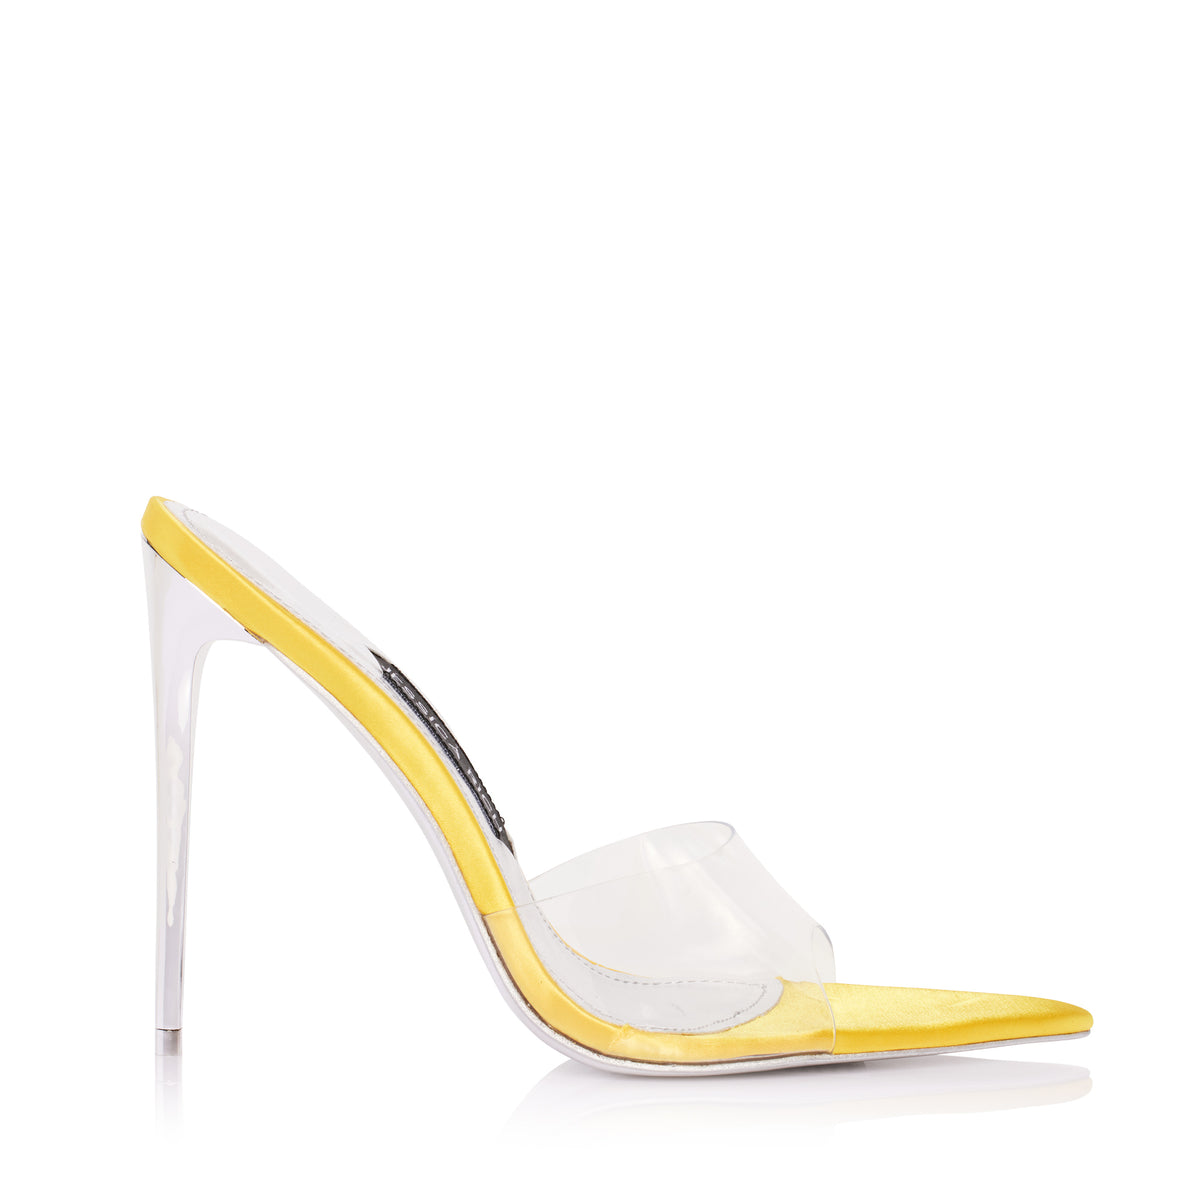 Profile of the yellow Racy Mule high heels from luxury women’s shoe brand Jessica Rich.